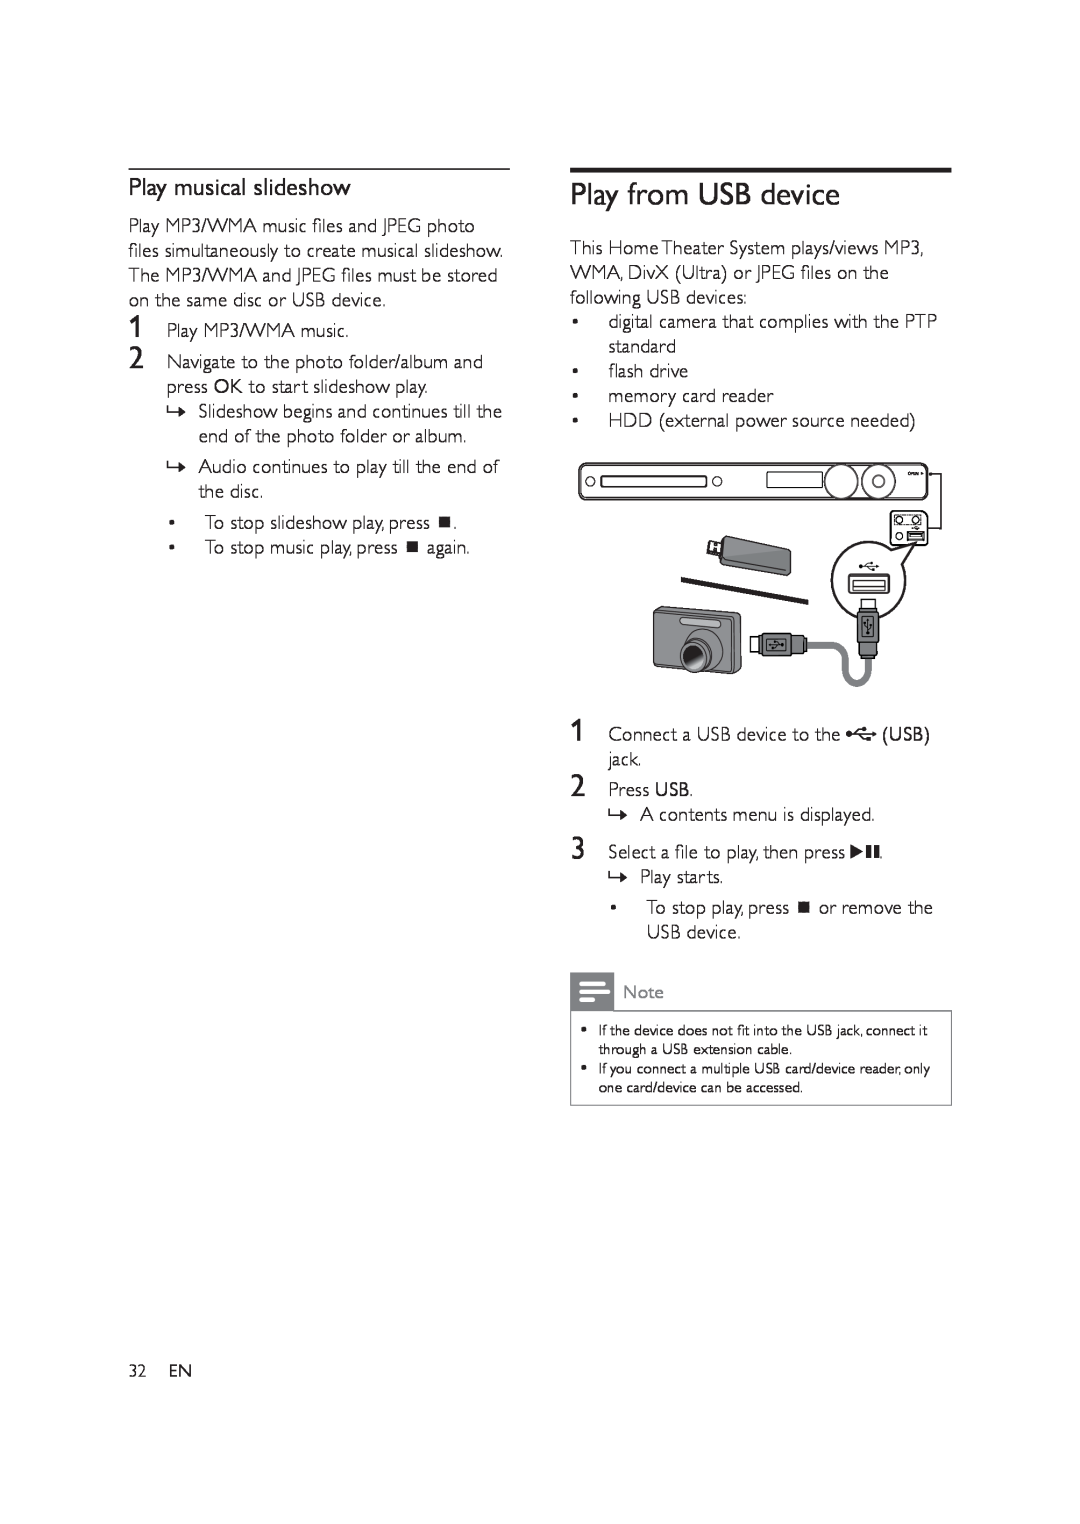 Philips HTS3578W user manual Play from USB device, Play musical slideshow 